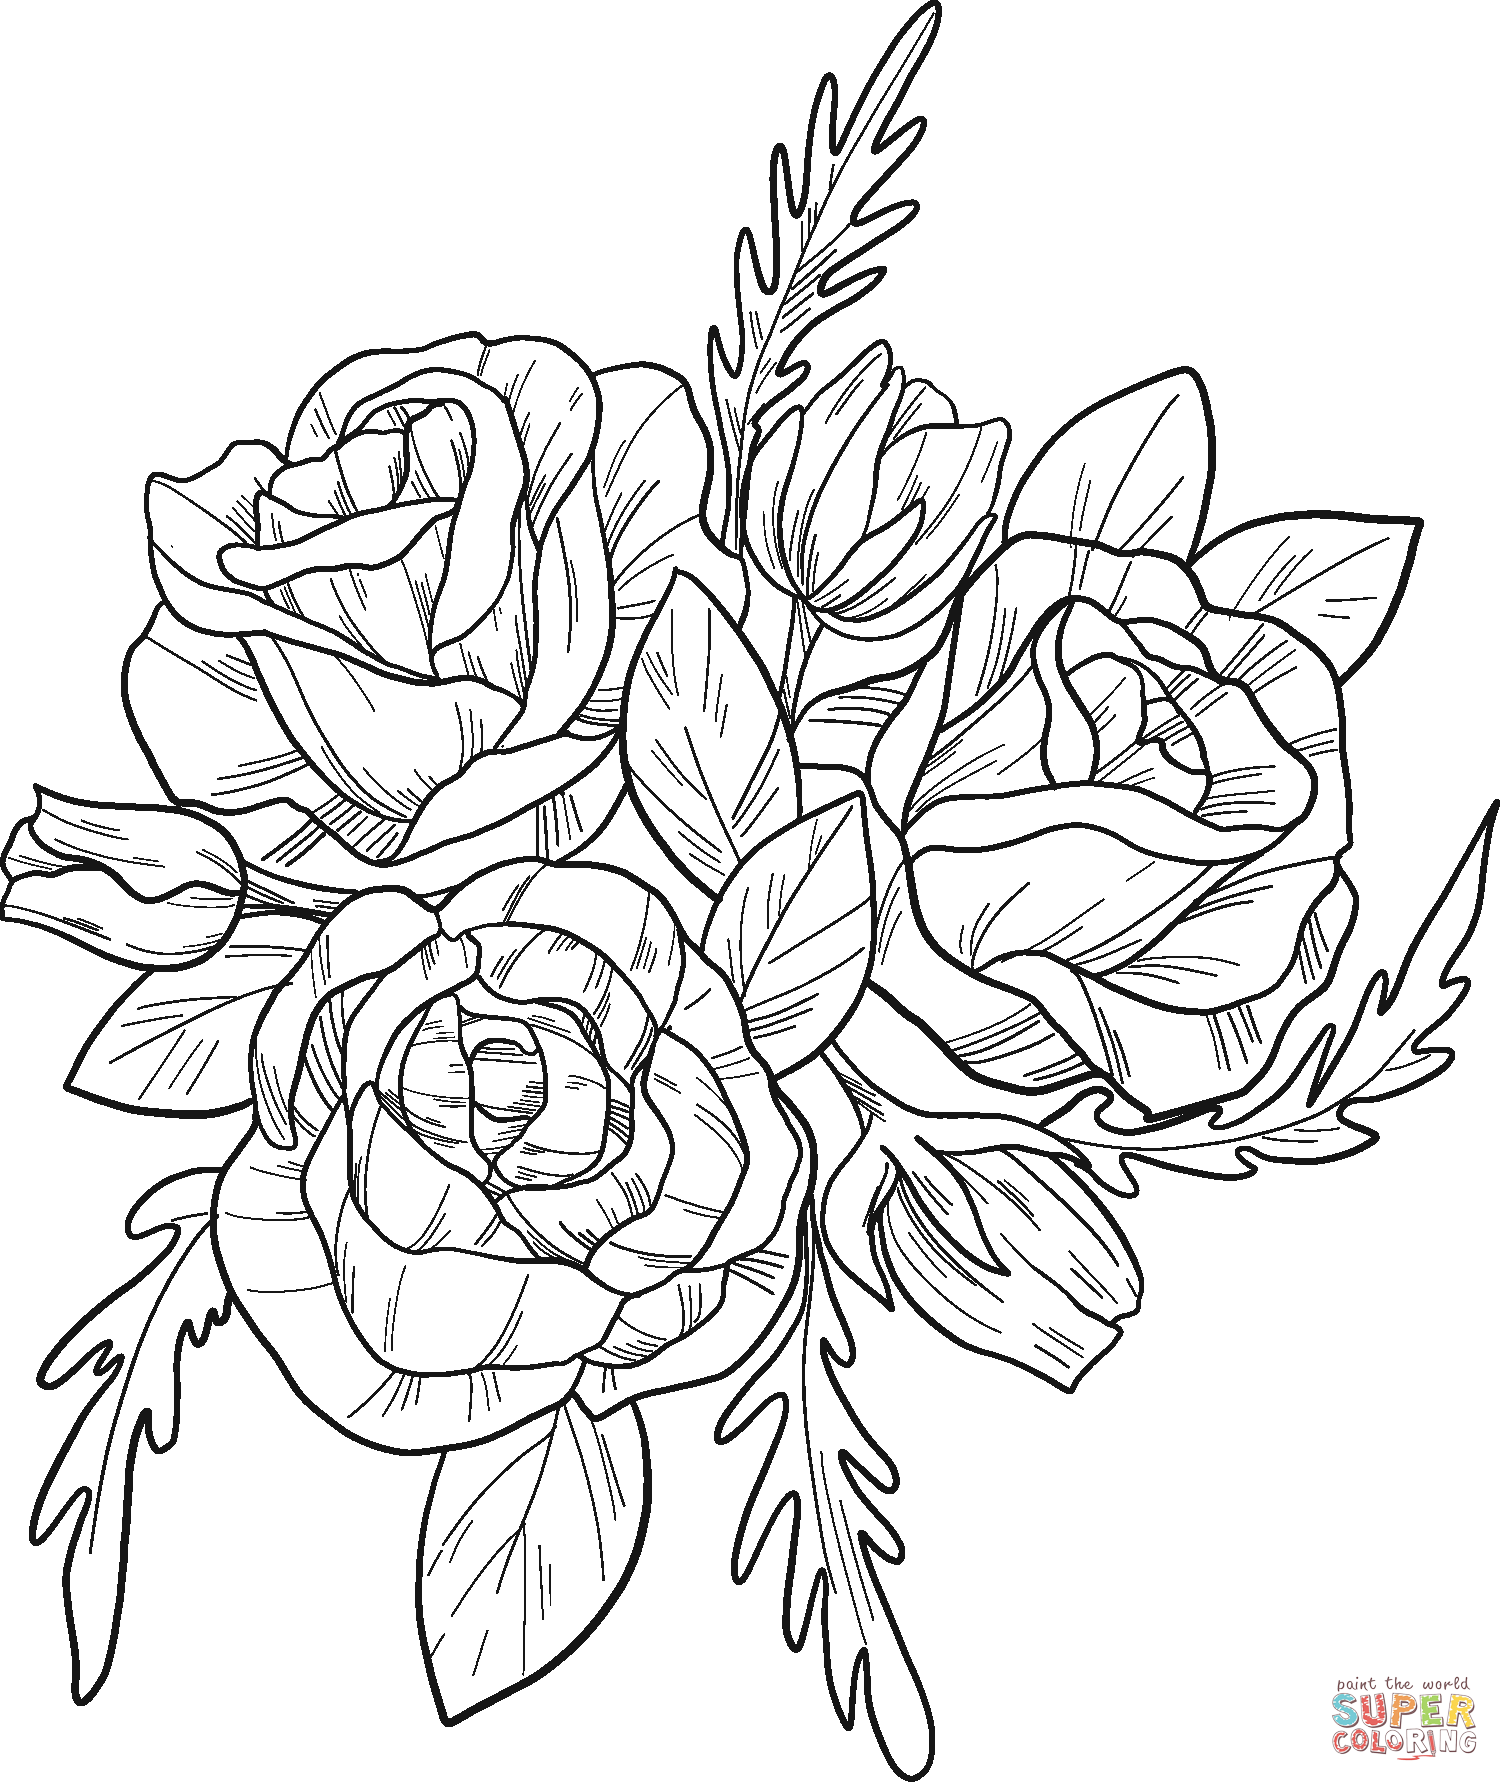 Bouquet of Roses Coloring Pages   Roses Coloring Pages   Coloring ...